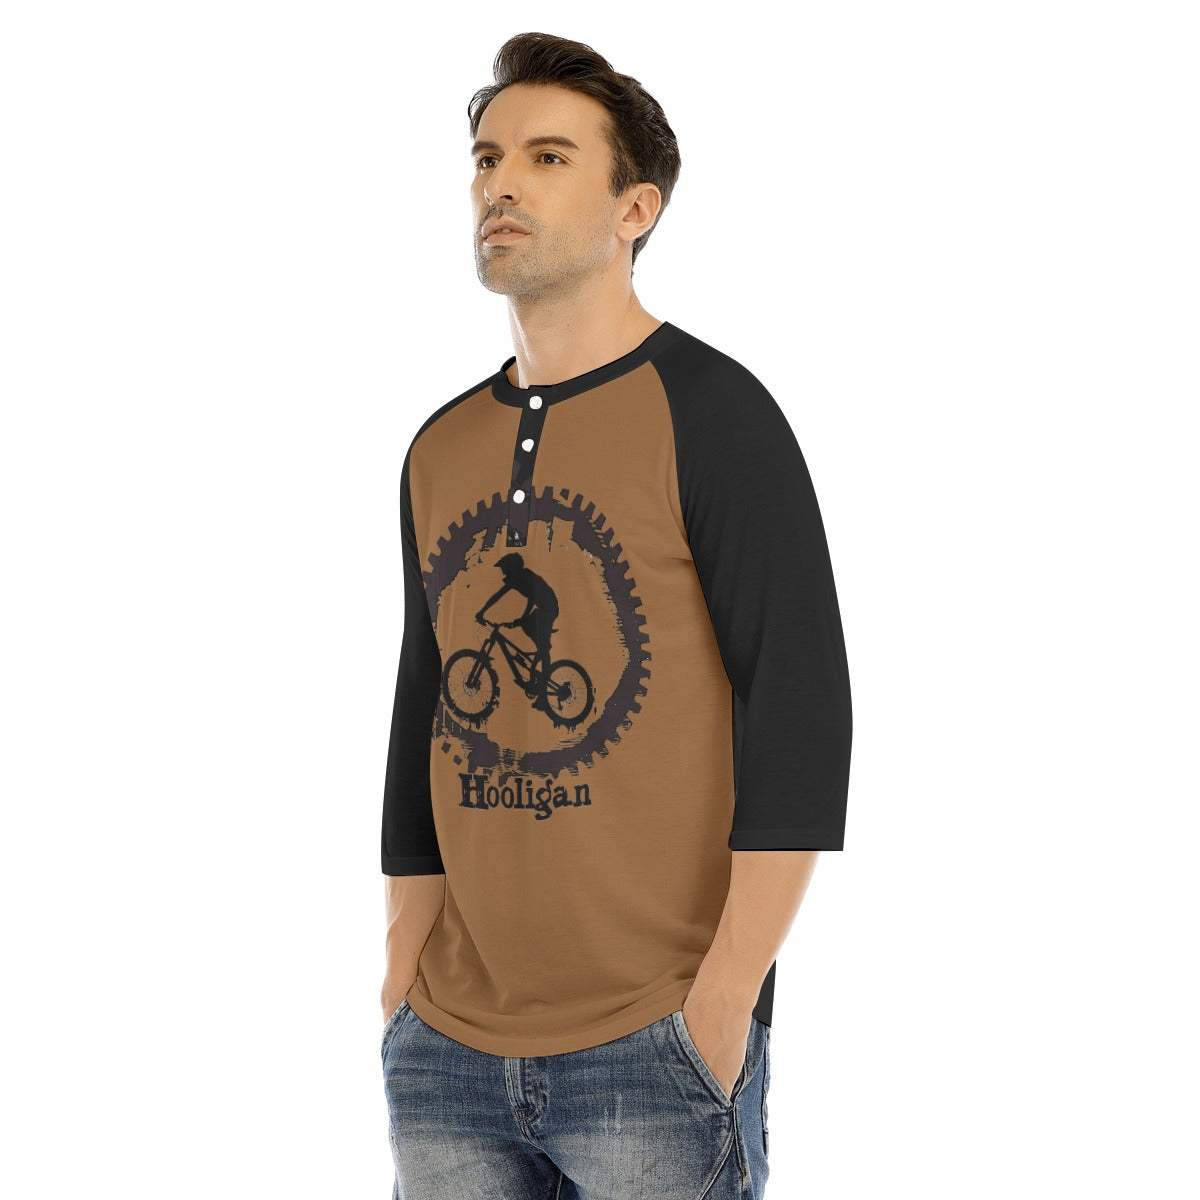 All-Over Print Men's Bracelet Sleeve T-shirt With Button Closure